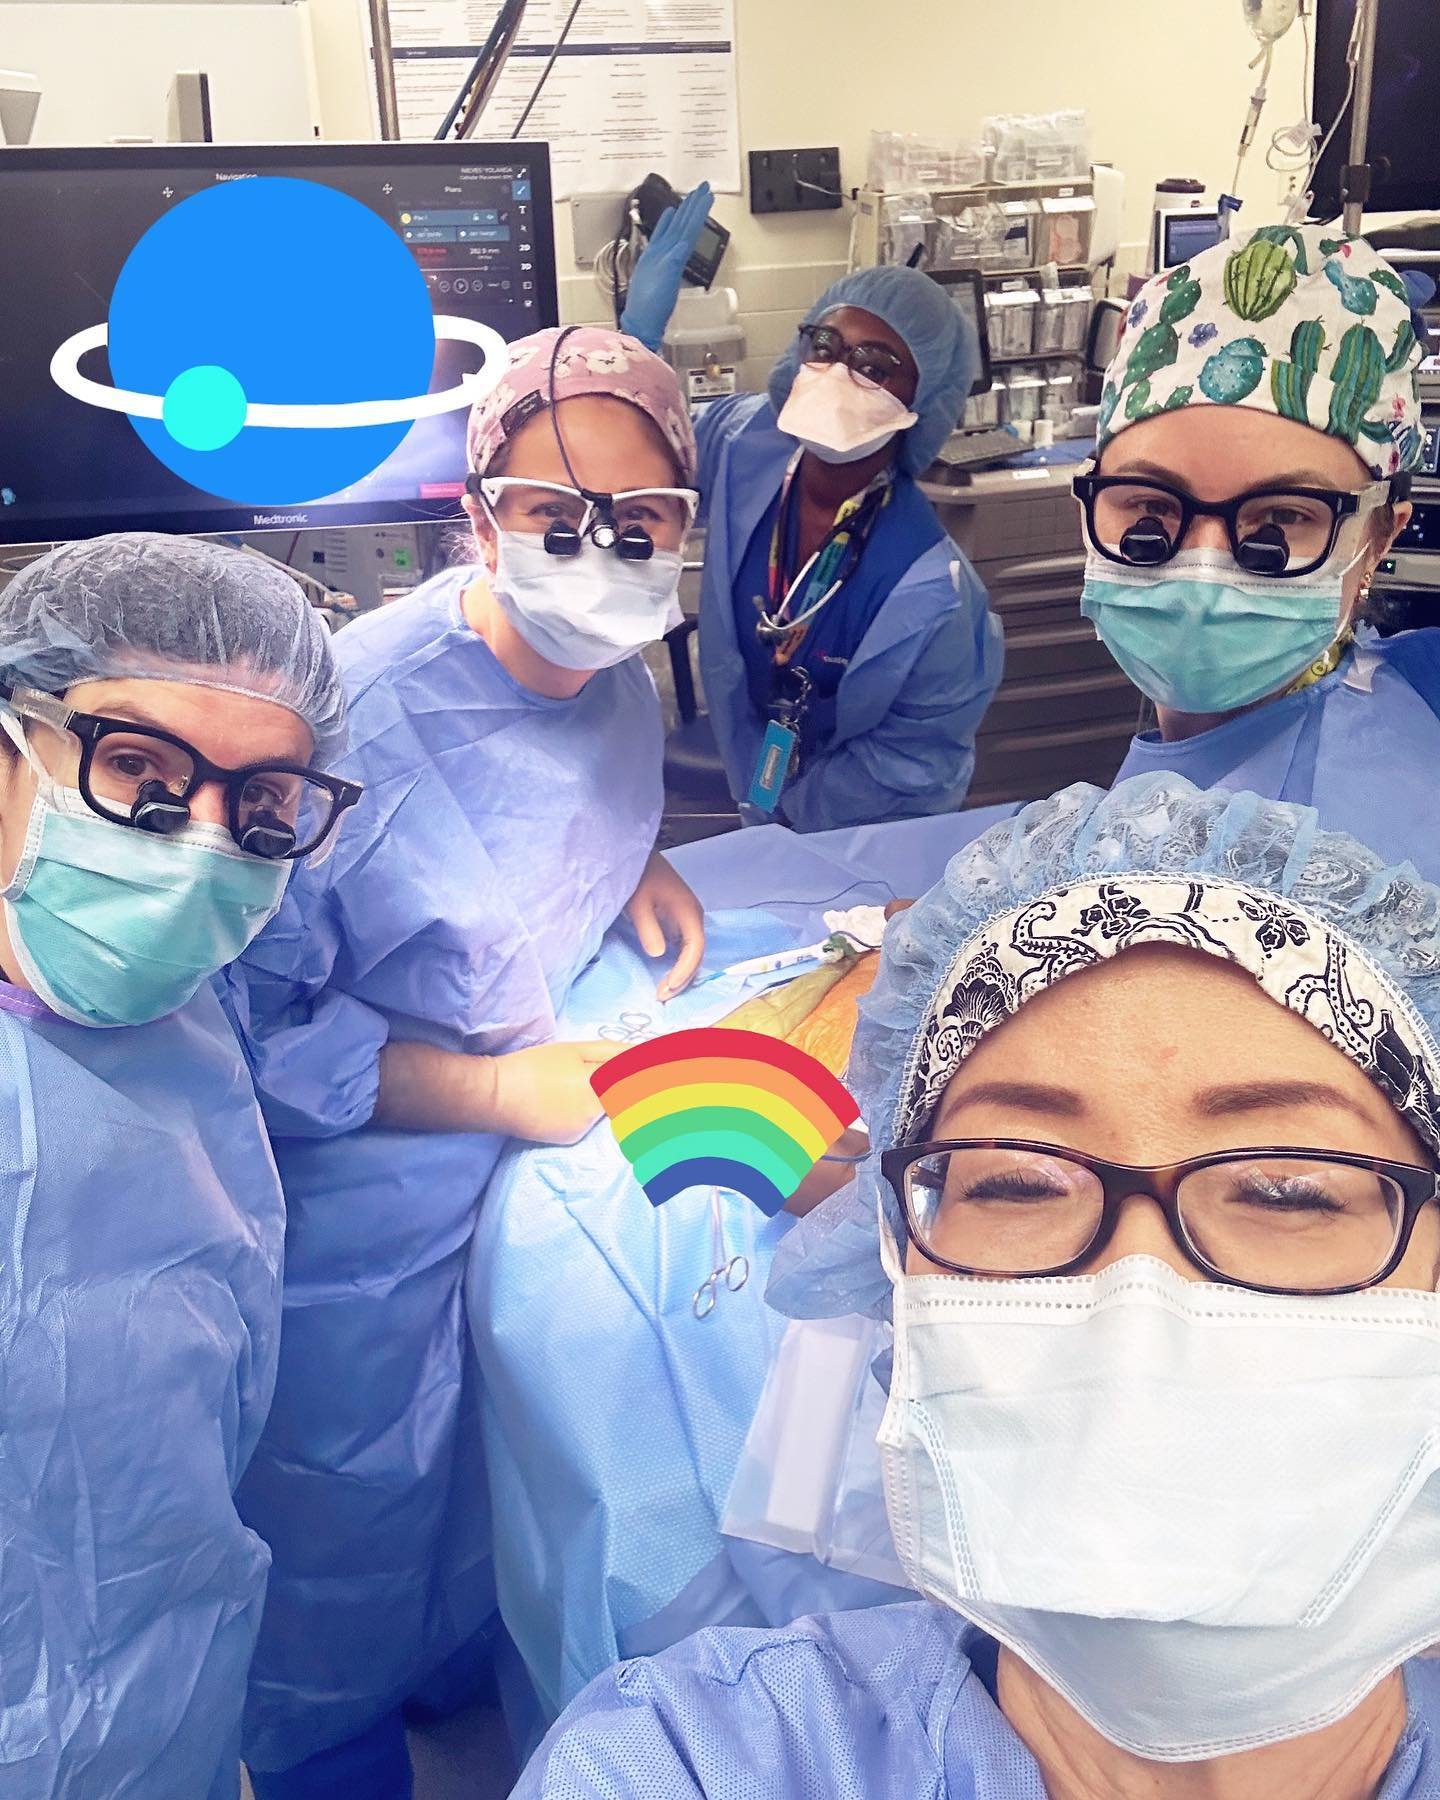 #ilooklikeasurgeon 
An all female surgical team from attending Dr. Crisman to circulating nurse Jin Young Lea today in the OR!